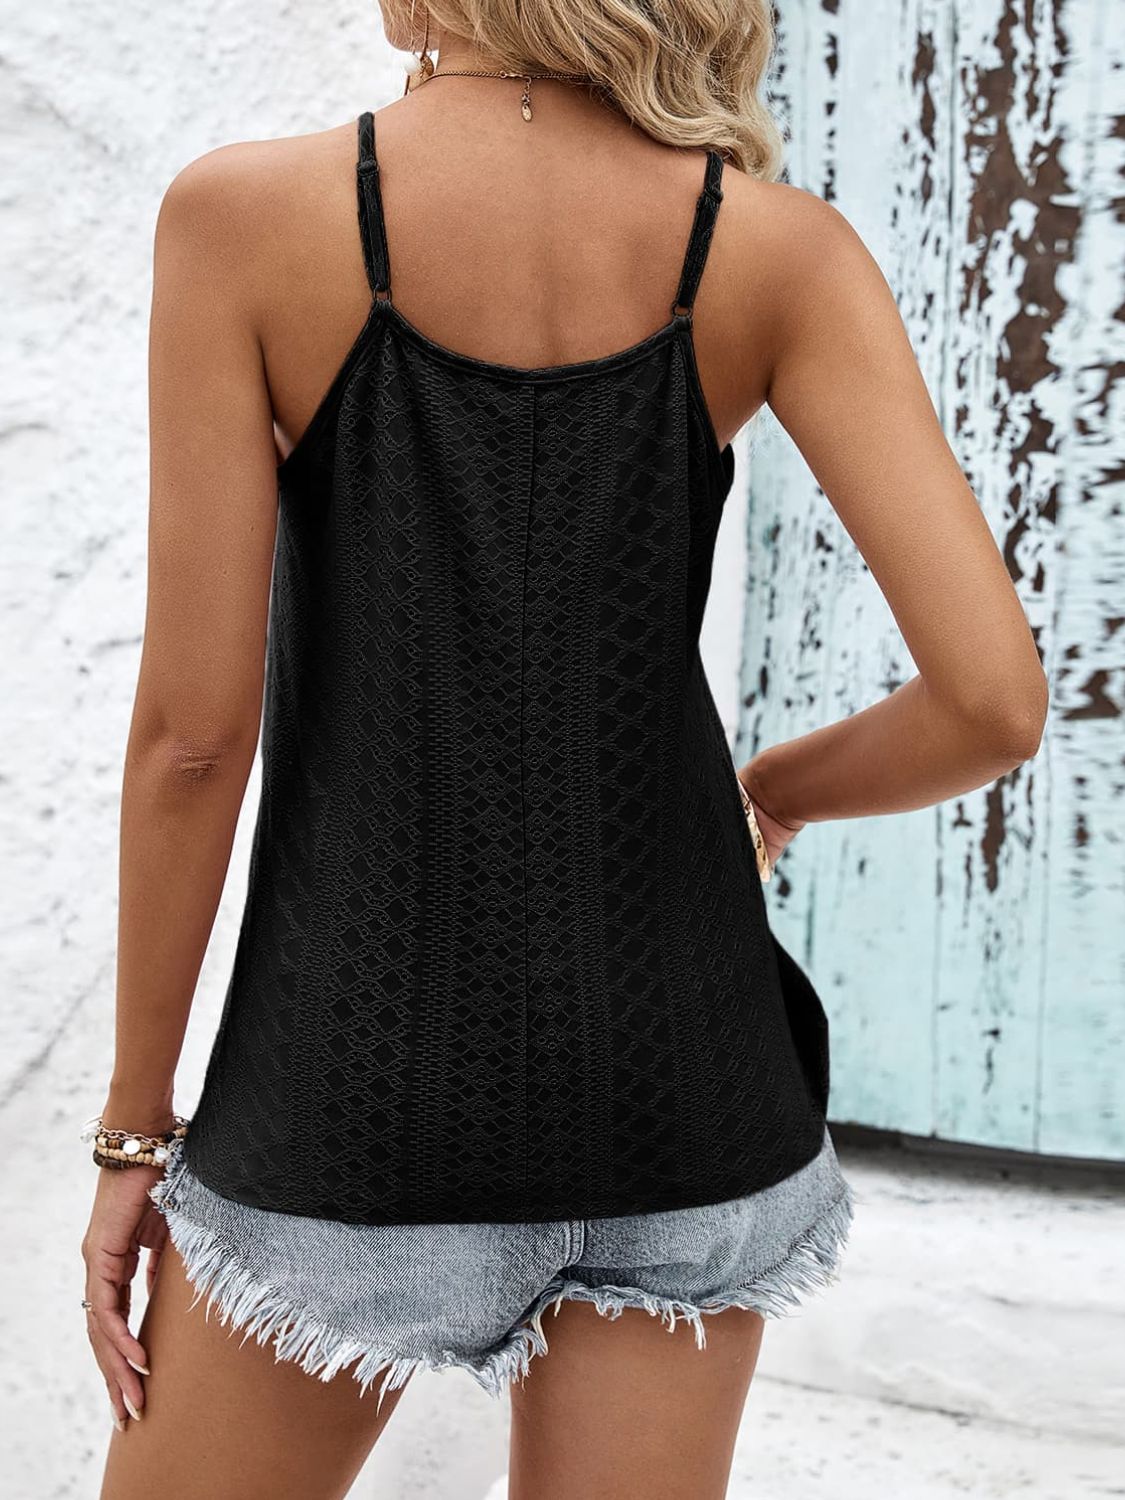 Women's Contrast Eyelet Lace Camisole Top